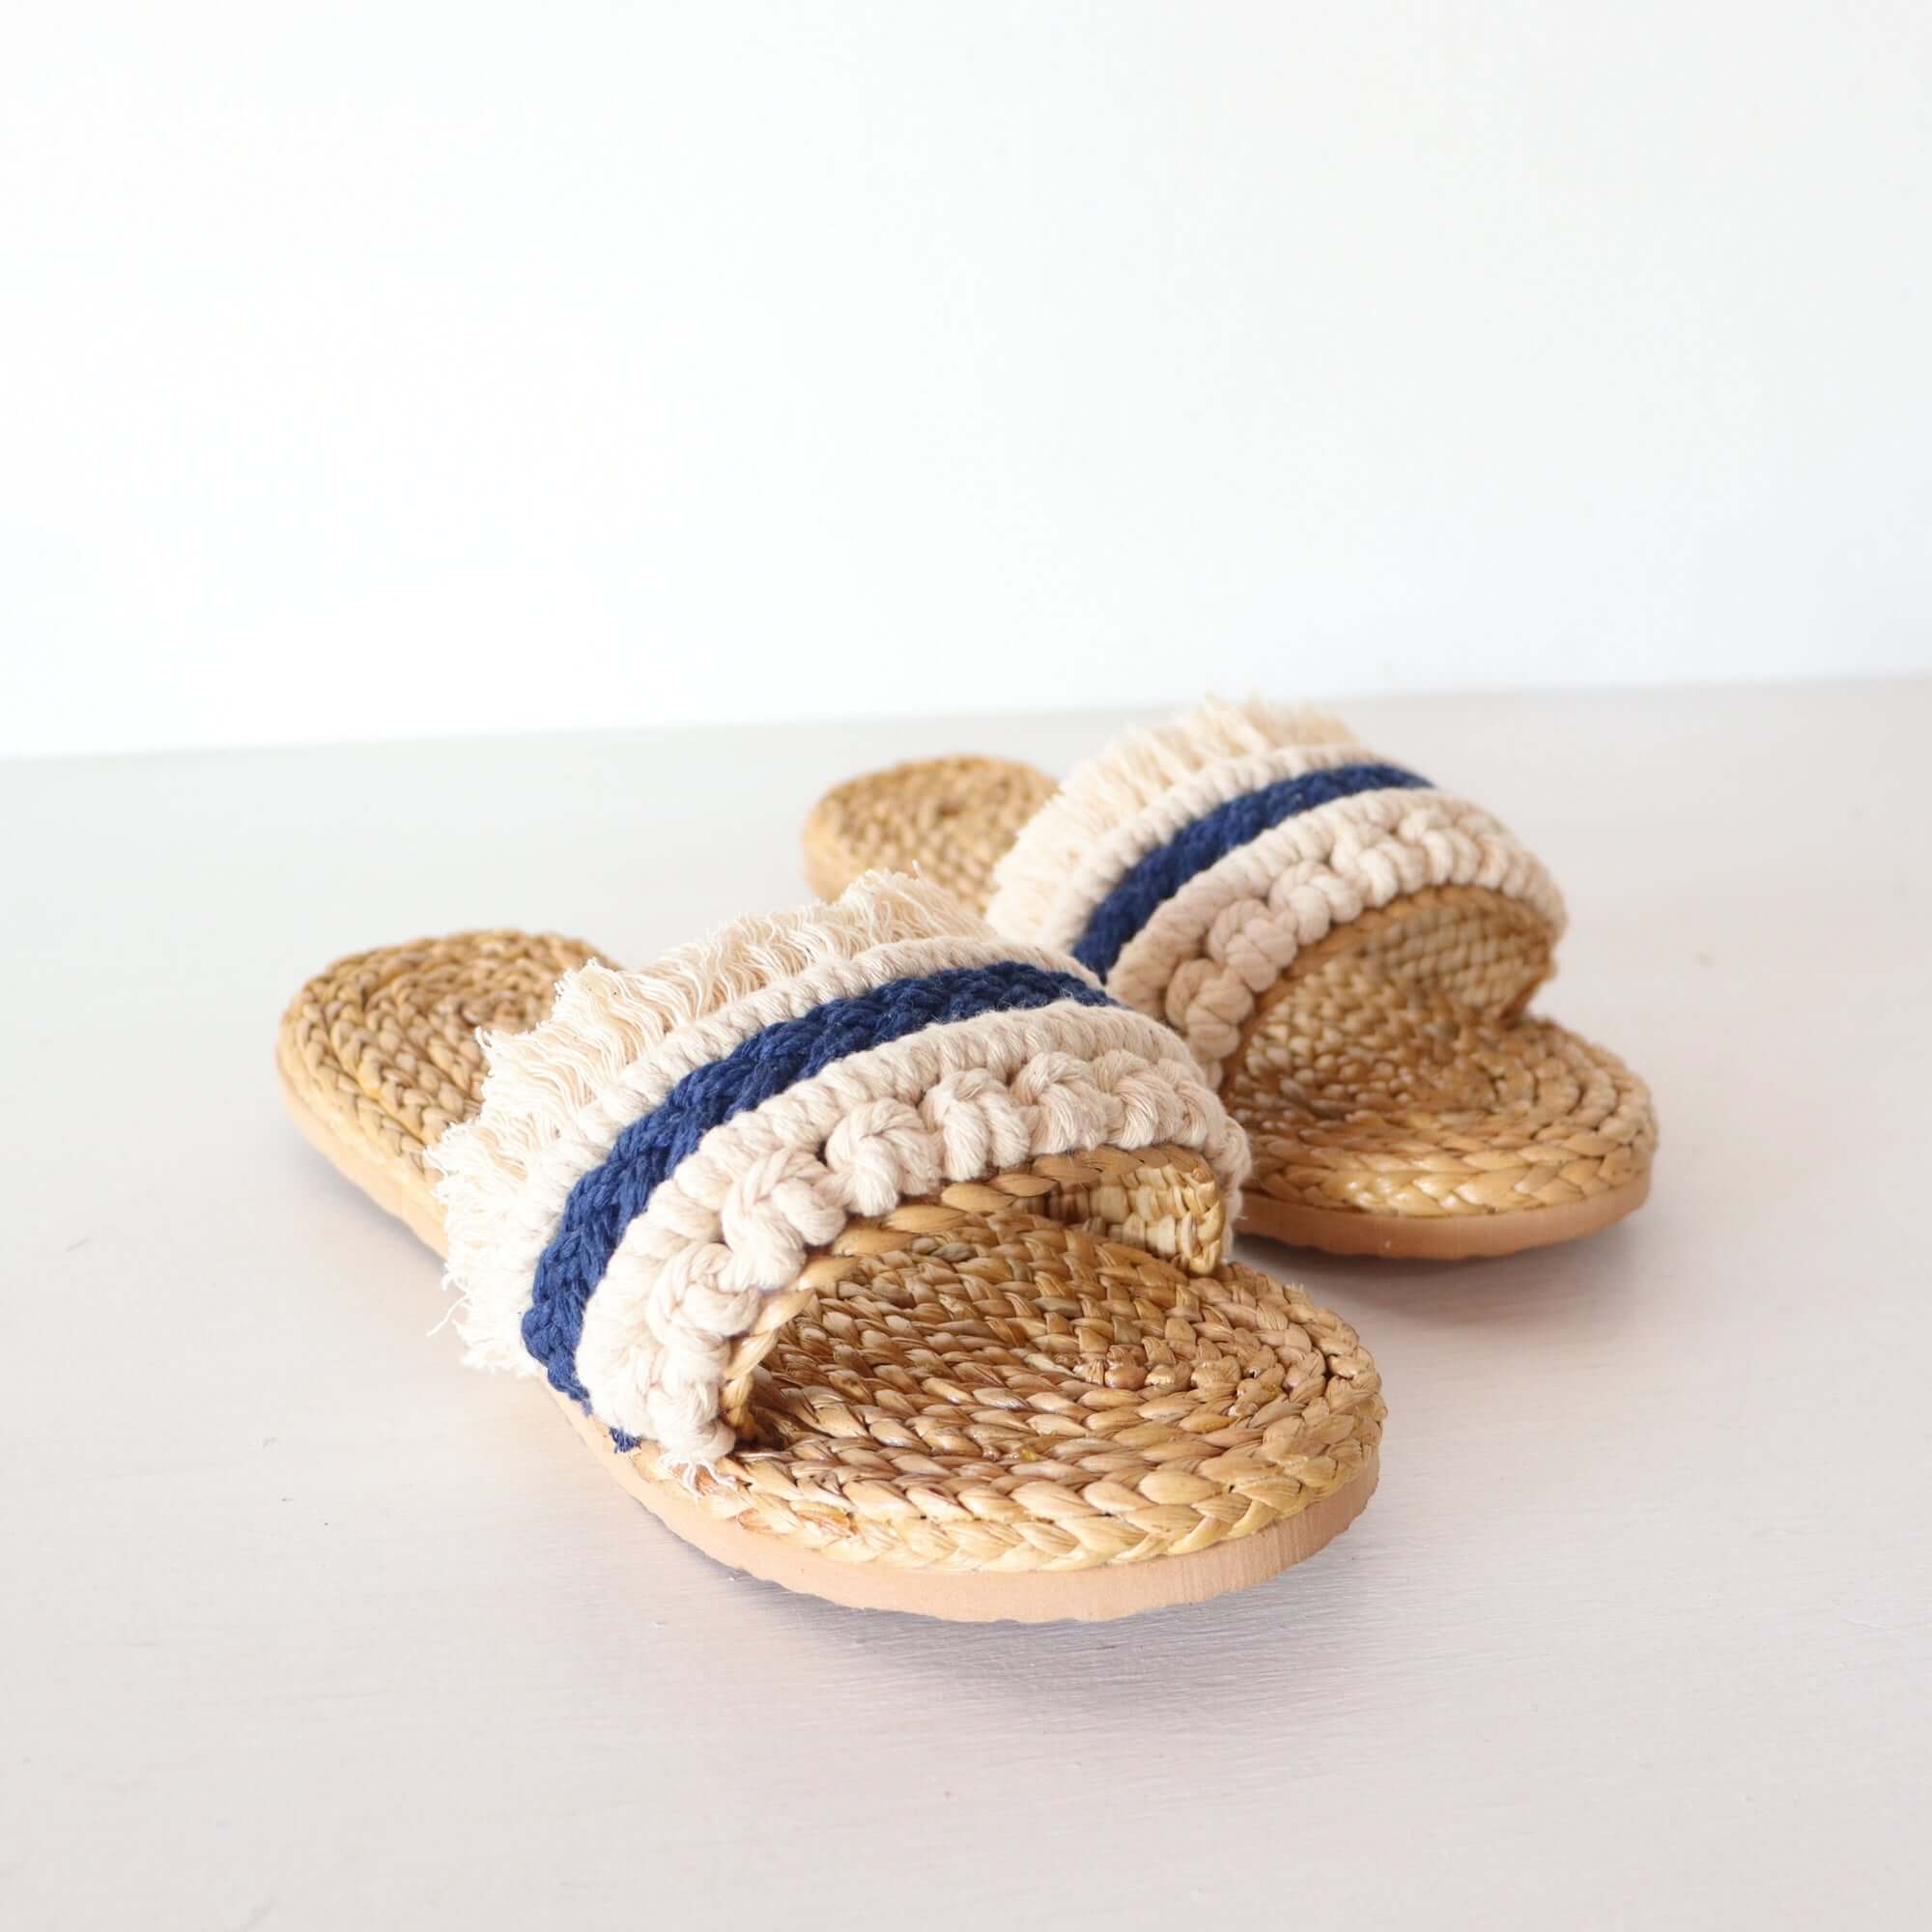 Macramé Straw Slippers - White and Blue